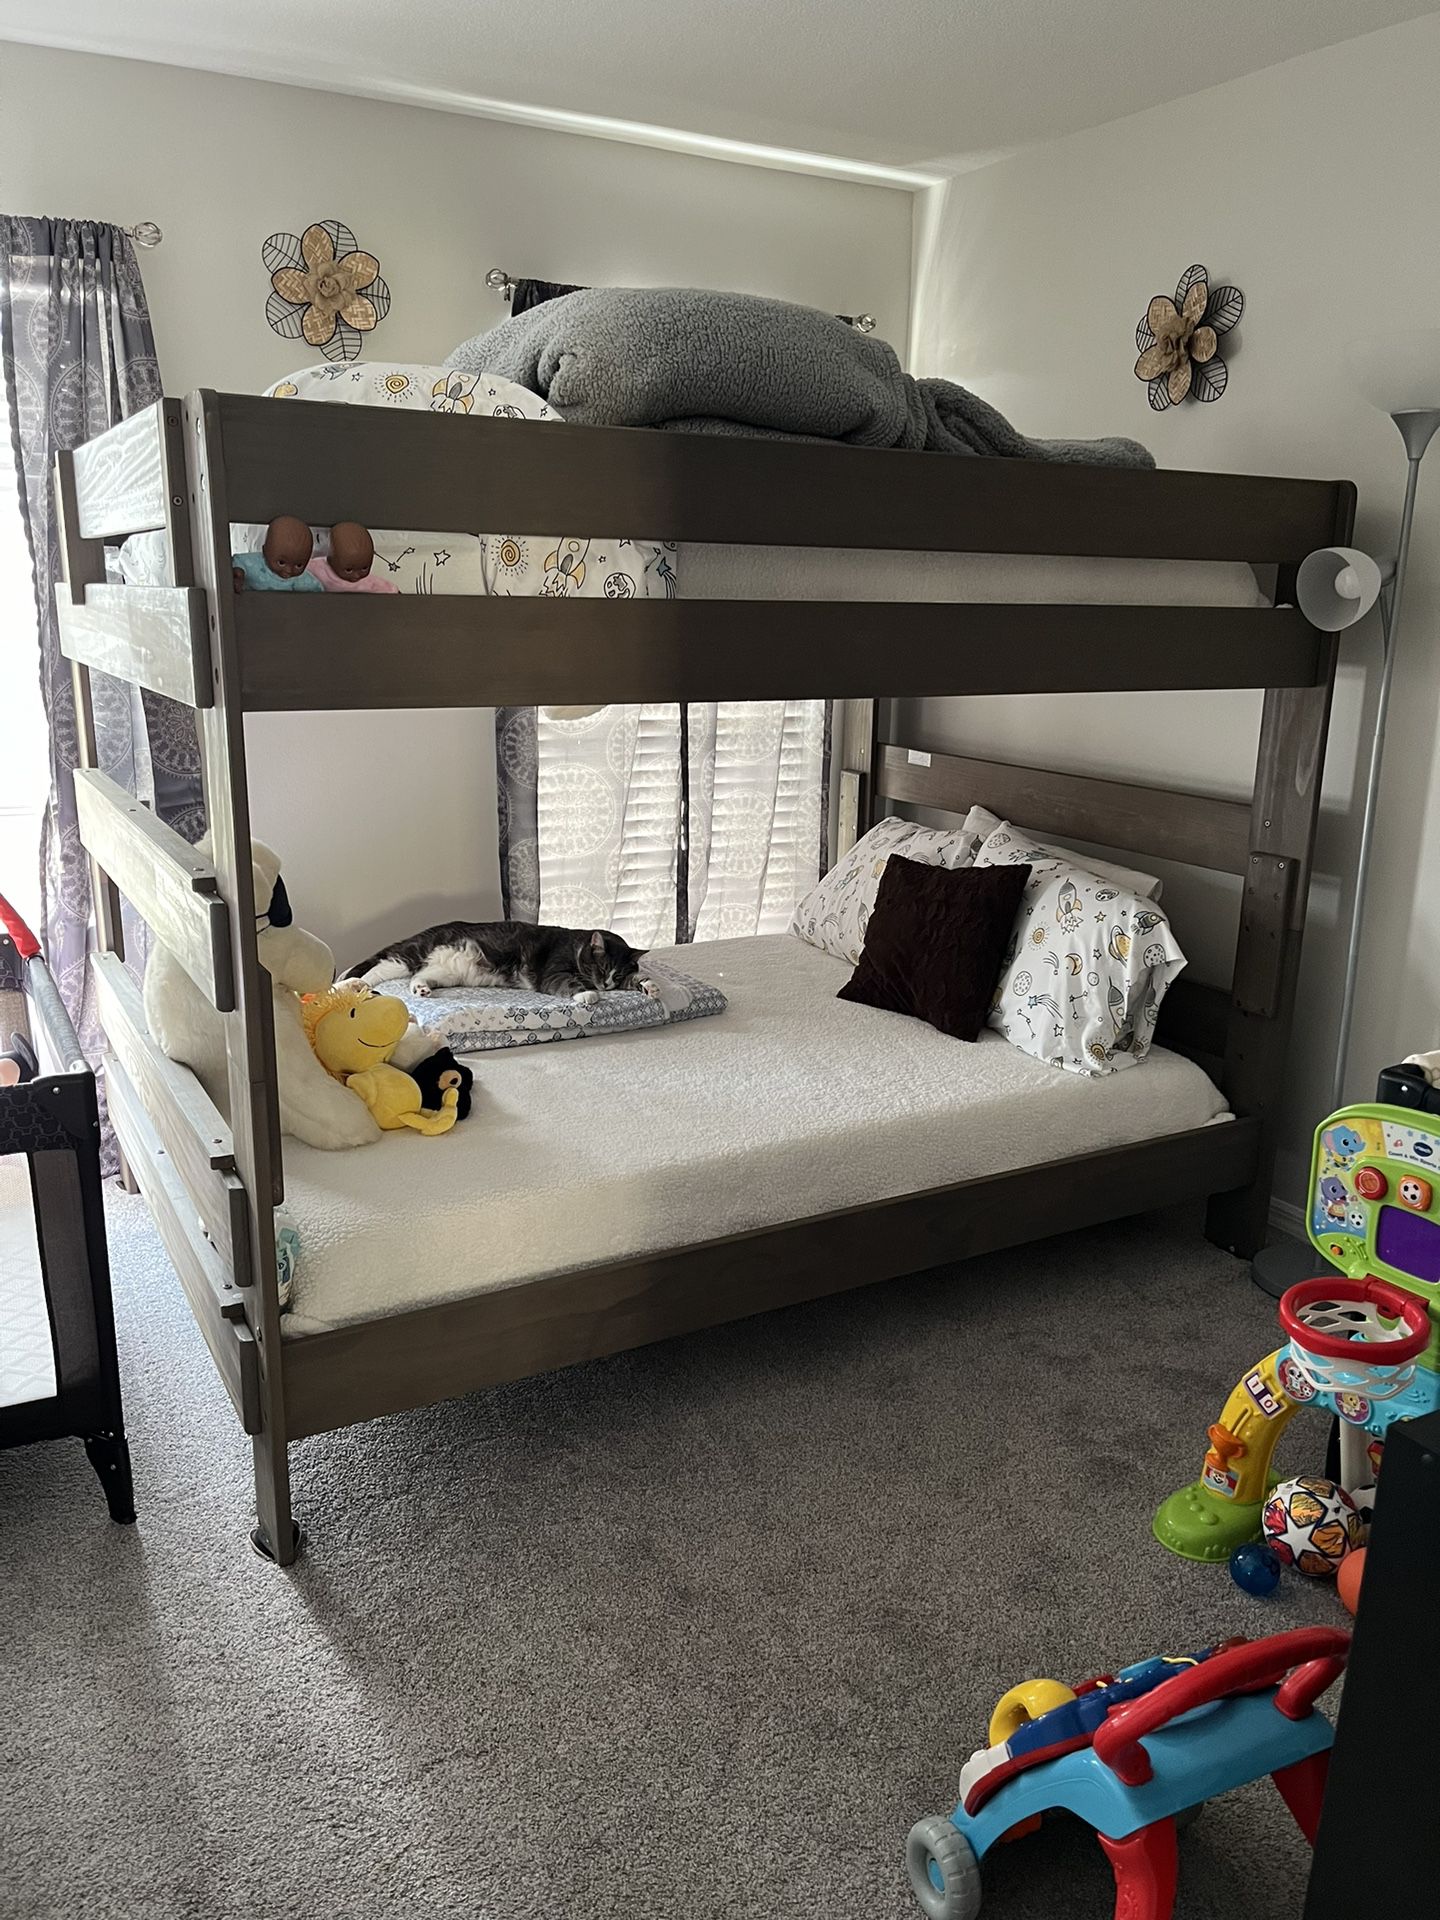 Bunk Beds - Max & Lily